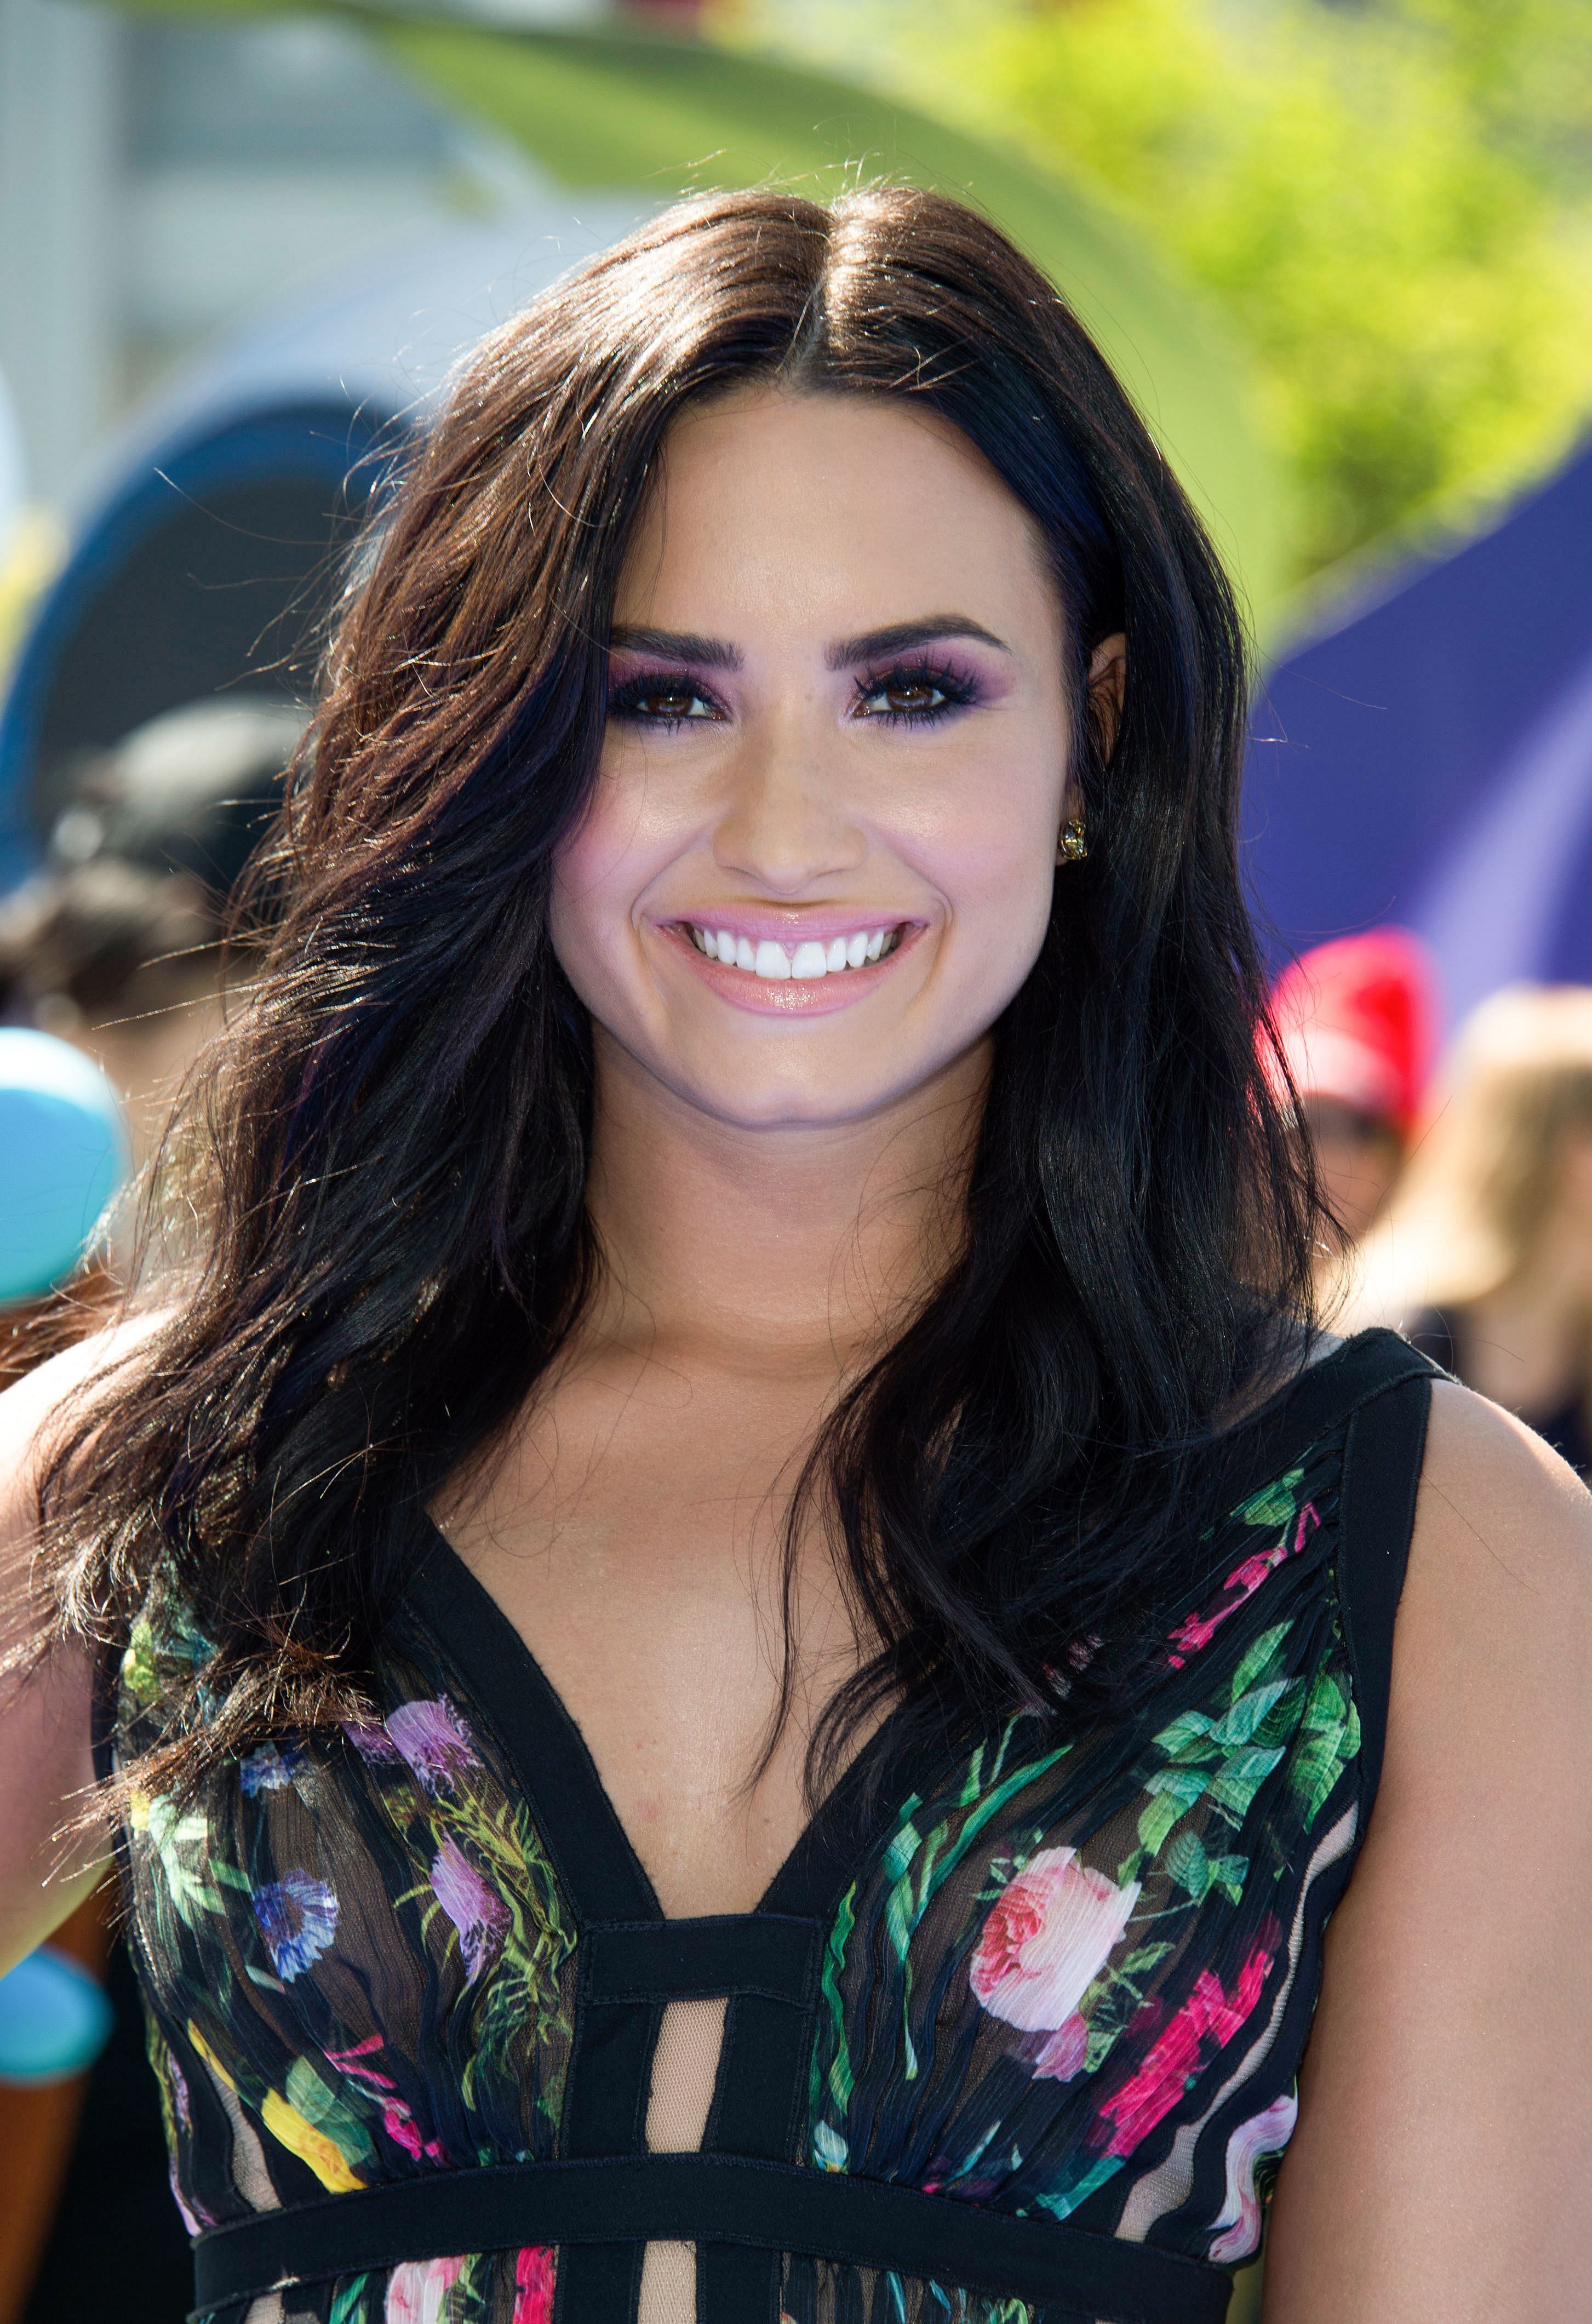 Demi Lovato recently suffered a relapse, after a long battle with drug and alcohol addiction.